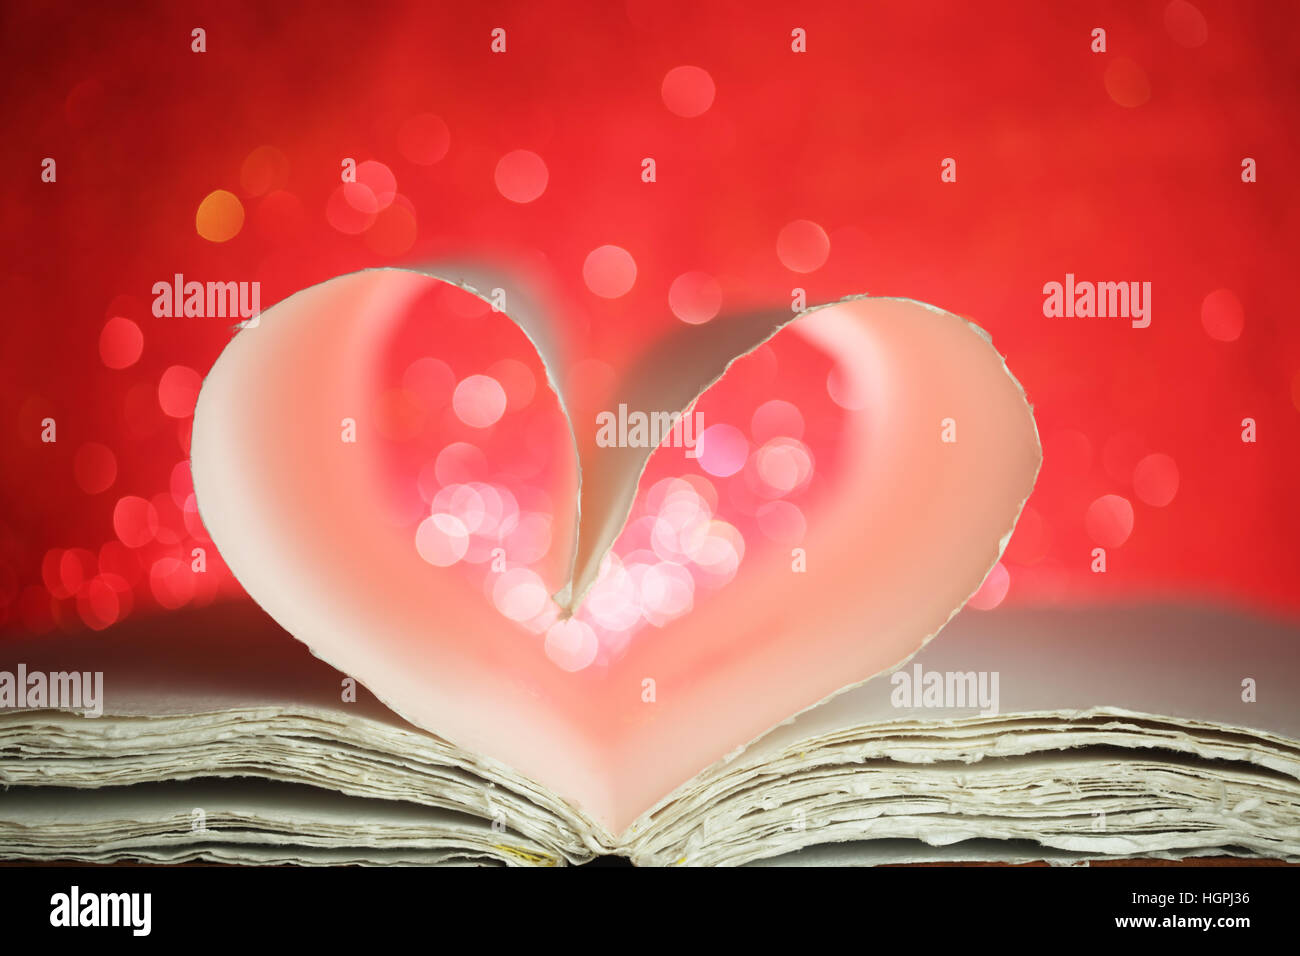 Book pages in the shape of a heart Stock Photo